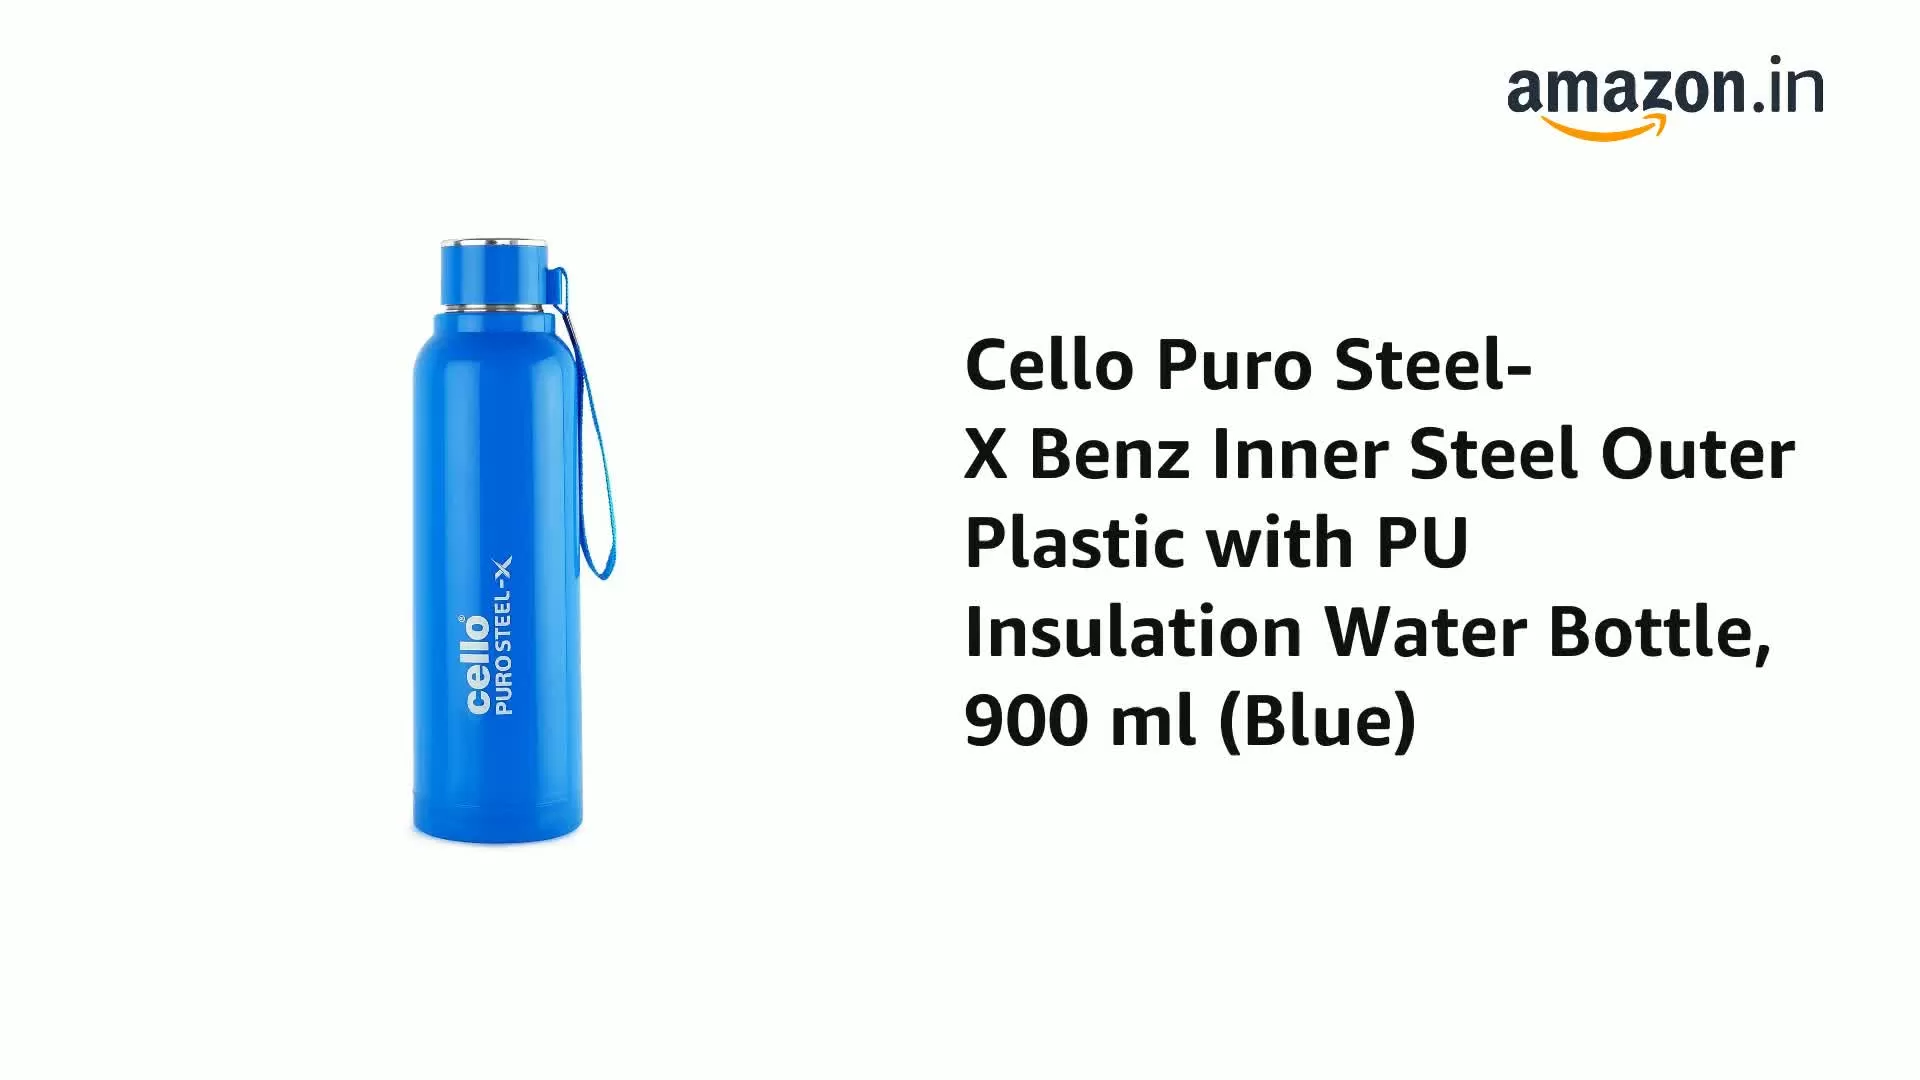 Cello Puro Steel-X Benz Water Bottle with Inner Steel and Outer Plastic 900 ml (Blue), 2 image